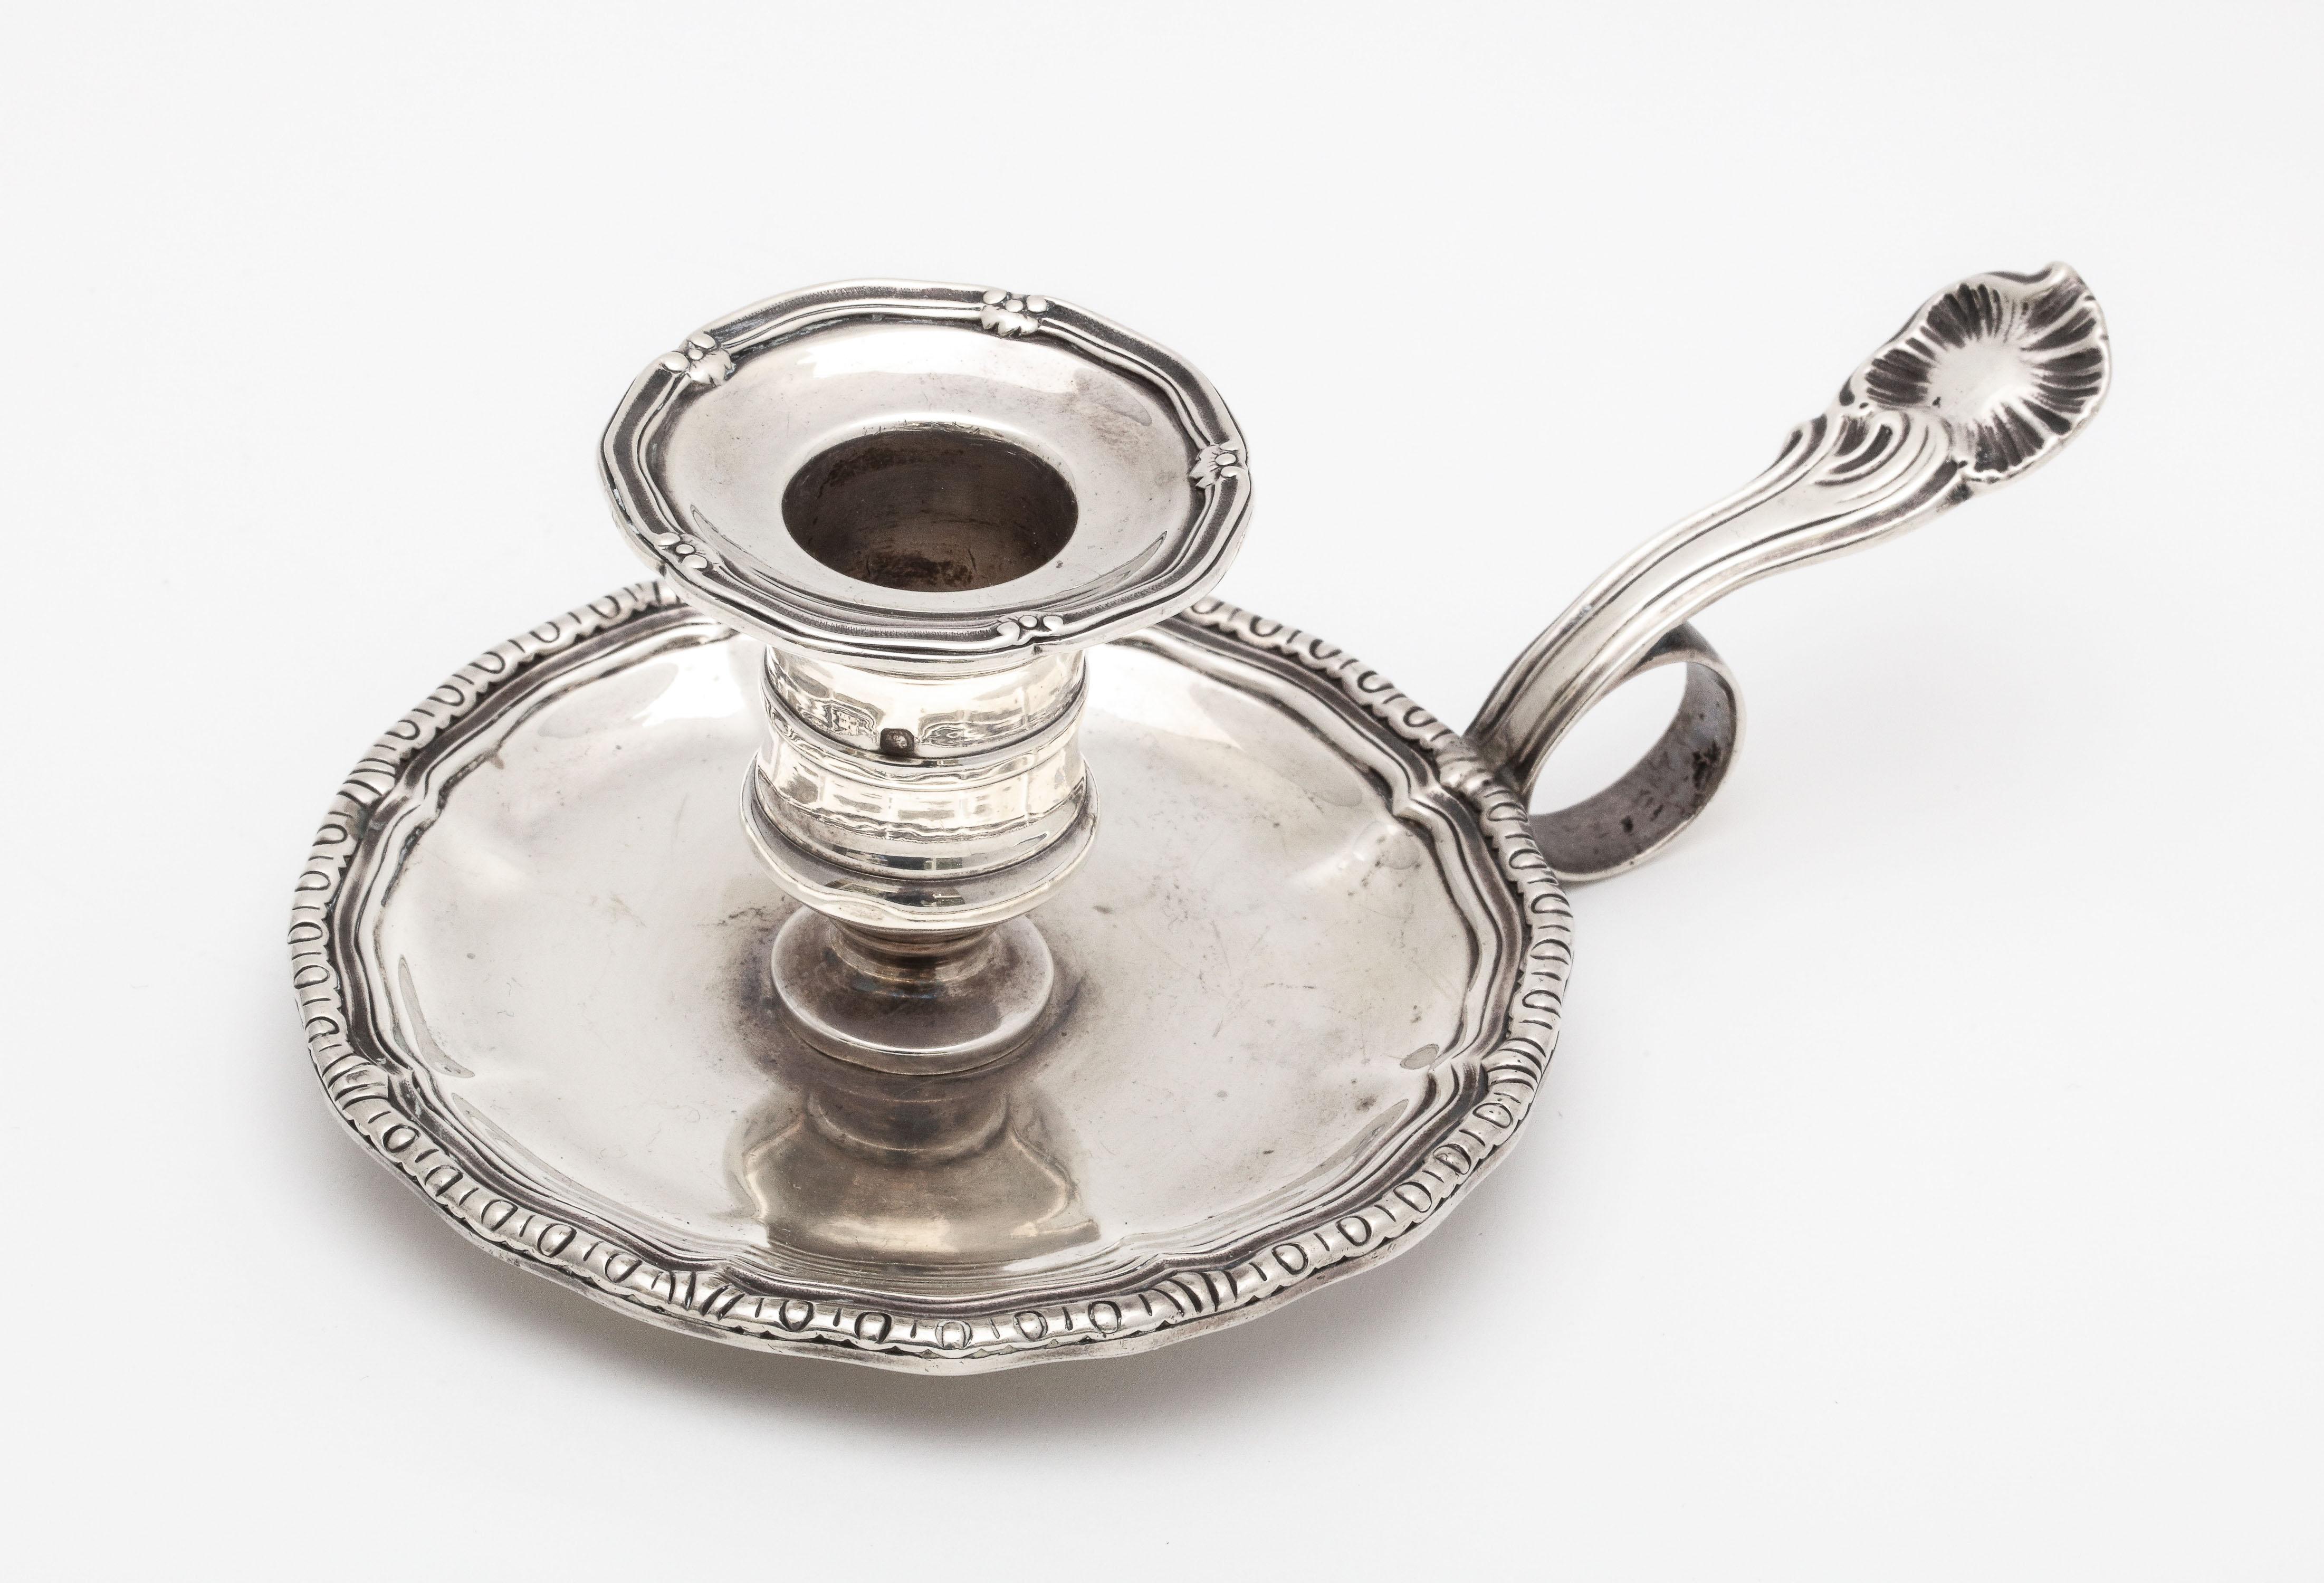 French, Second Empire, sterling silver chamberstick, Paris, circa 1850s. Measures 6 1/2 inches wide from edge of handle to far edge of tray x 2 3/4 inches high x 4 inches diameter. Weighs 7.050 troy ounces. Tray is attached to candleholder with a